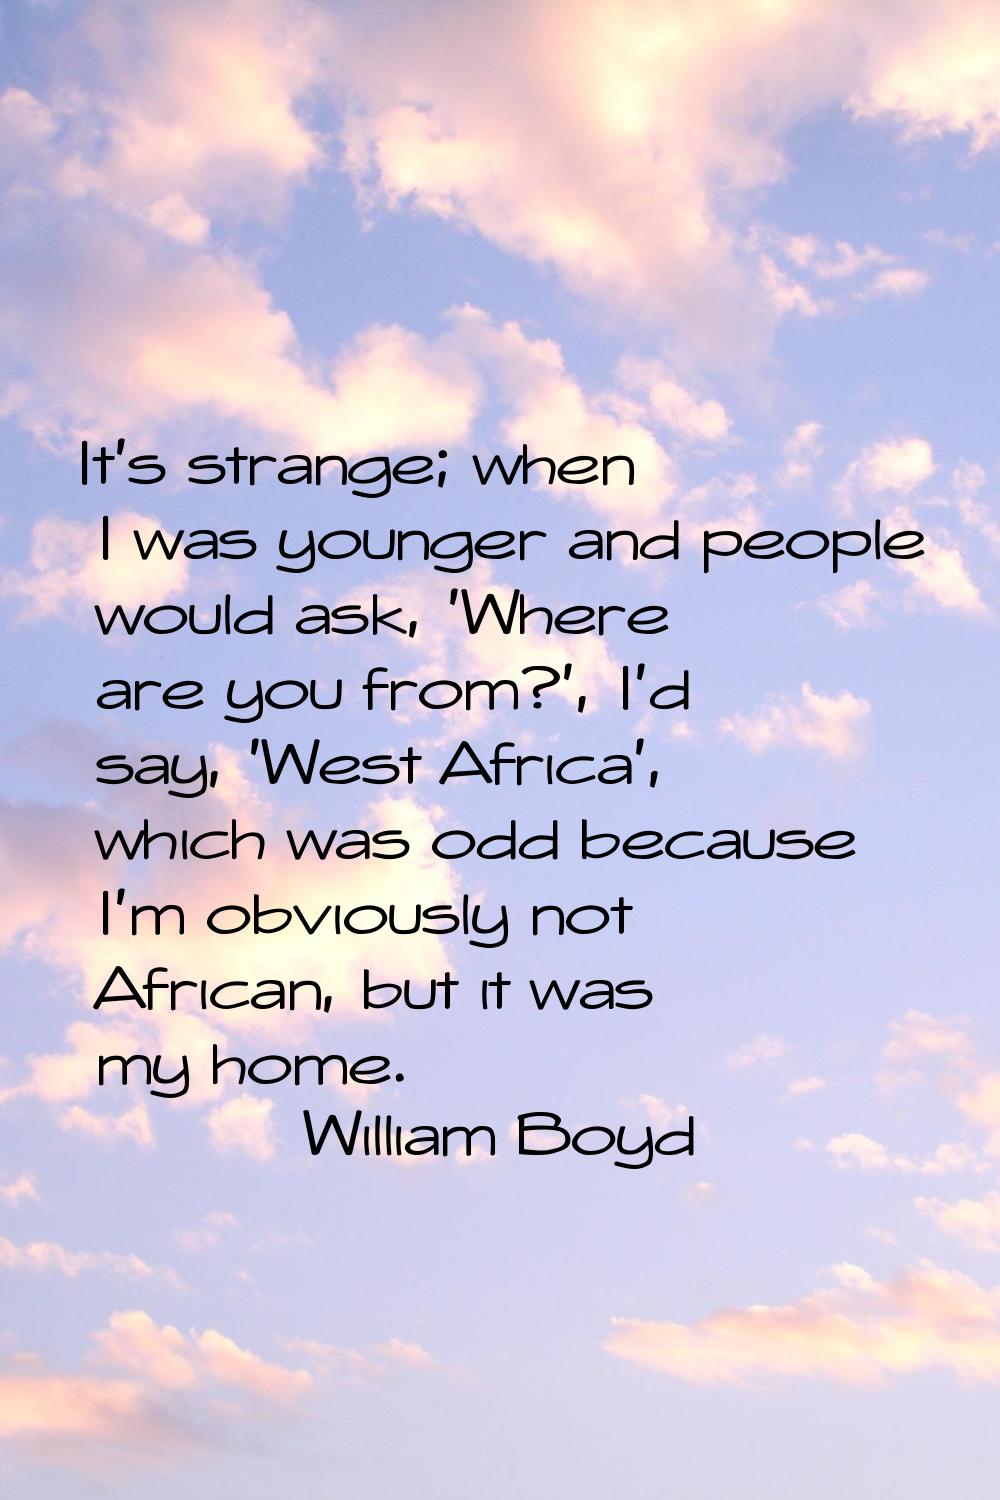 It's strange; when I was younger and people would ask, 'Where are you from?', I'd say, 'West Africa